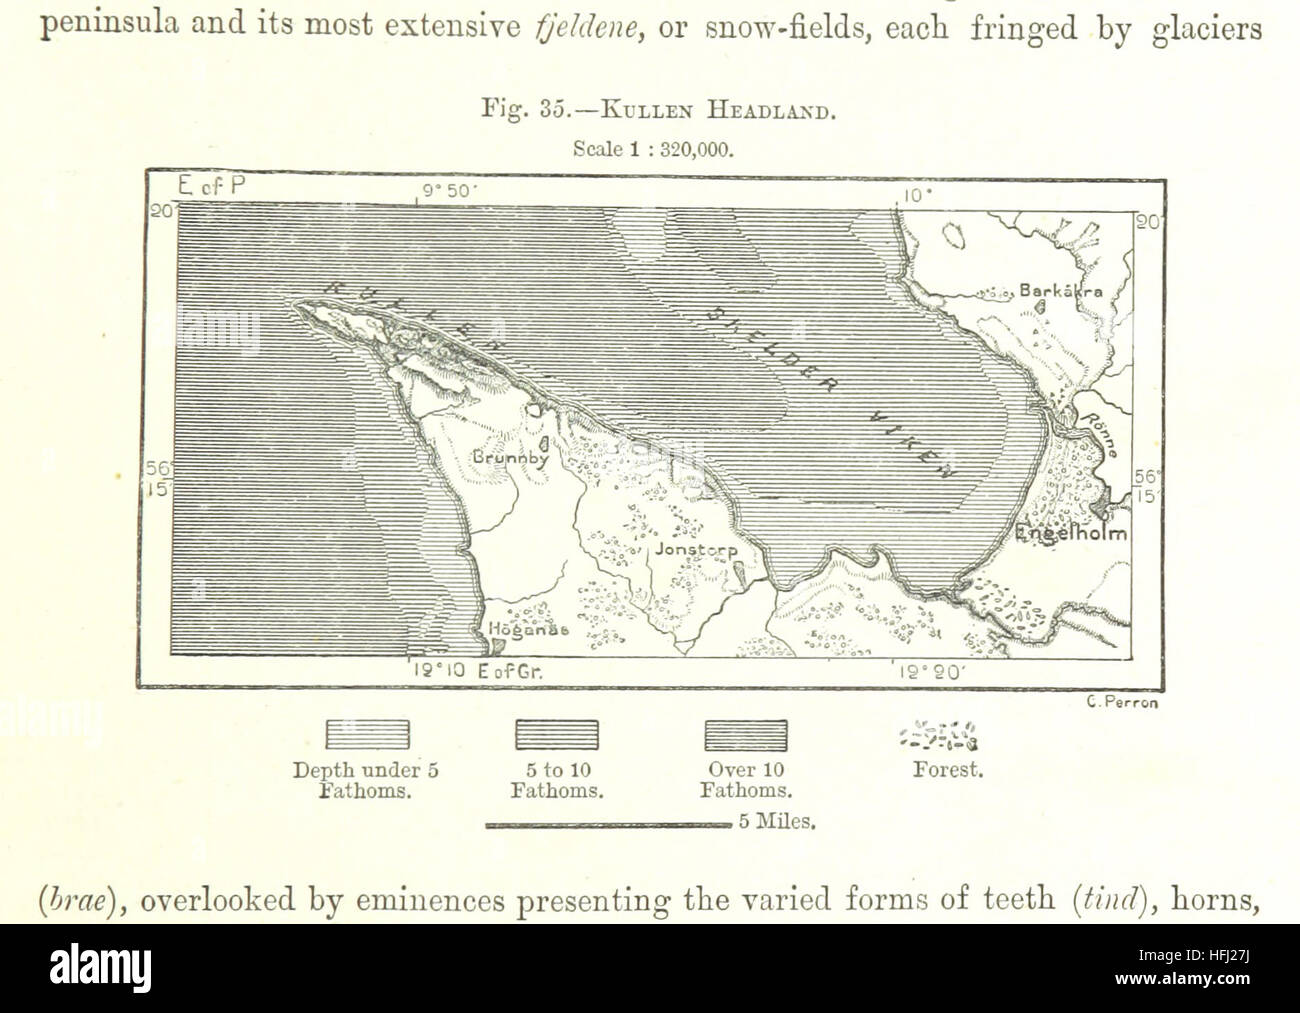 Image taken from page 107 of 'The Earth and its Inhabitants. The European section of the Universal Geography by E. Reclus. Edited by E. G. Ravenstein. Illustrated by ... engravings and maps' Image taken from page 107 of 'The Earth and its Stock Photo